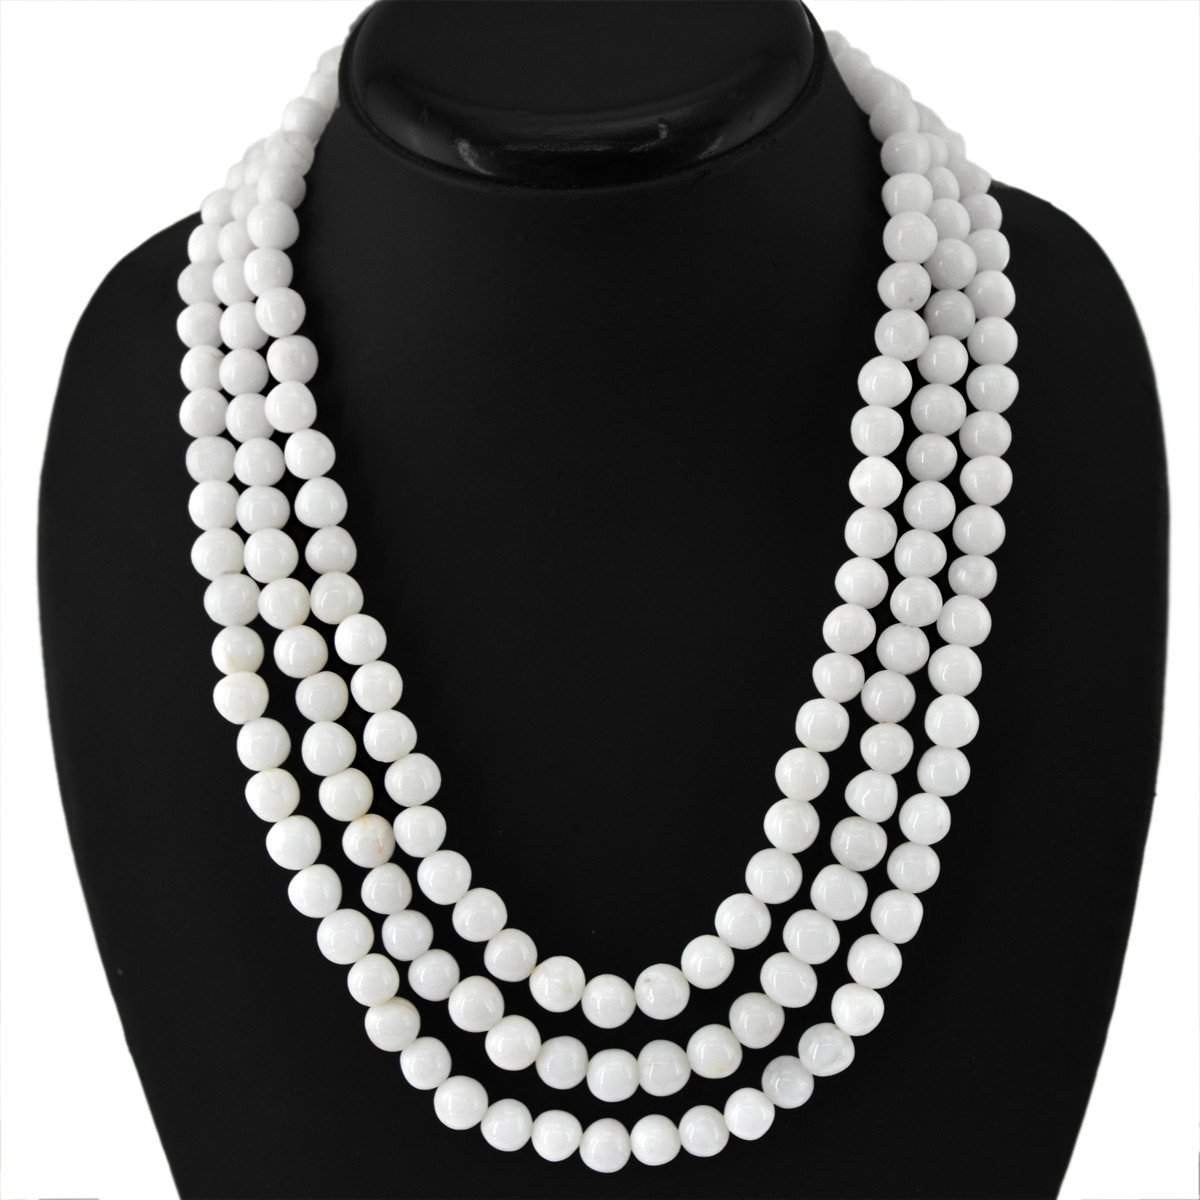 gemsmore:Natural White Agate Necklace 3 Strand Round Shape Beads Necklace